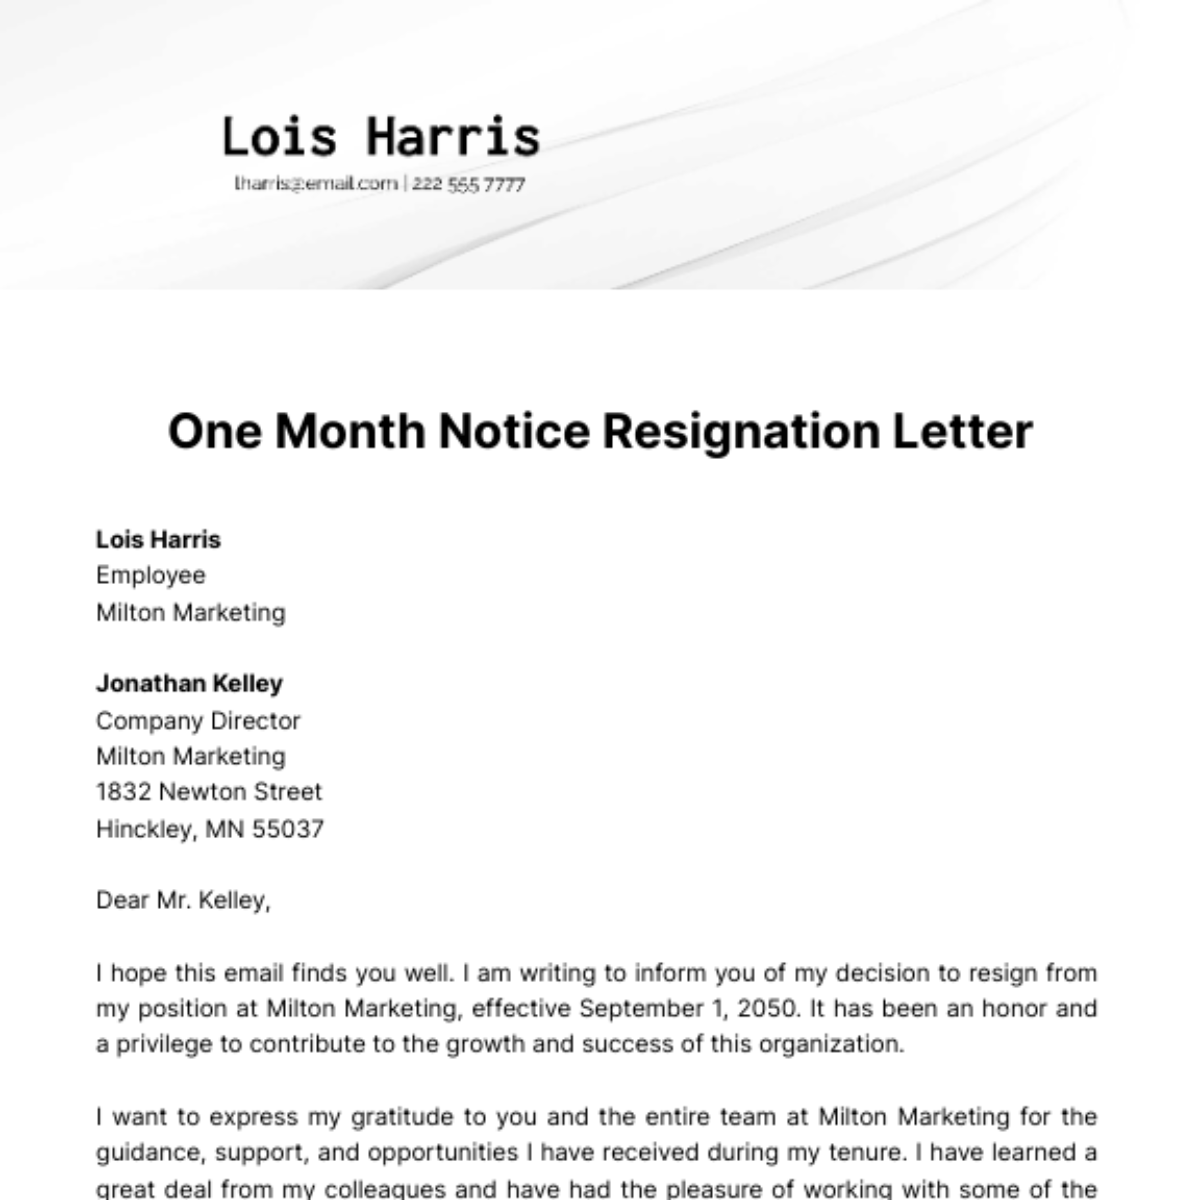 One Month Notice Resignation Letter  Template